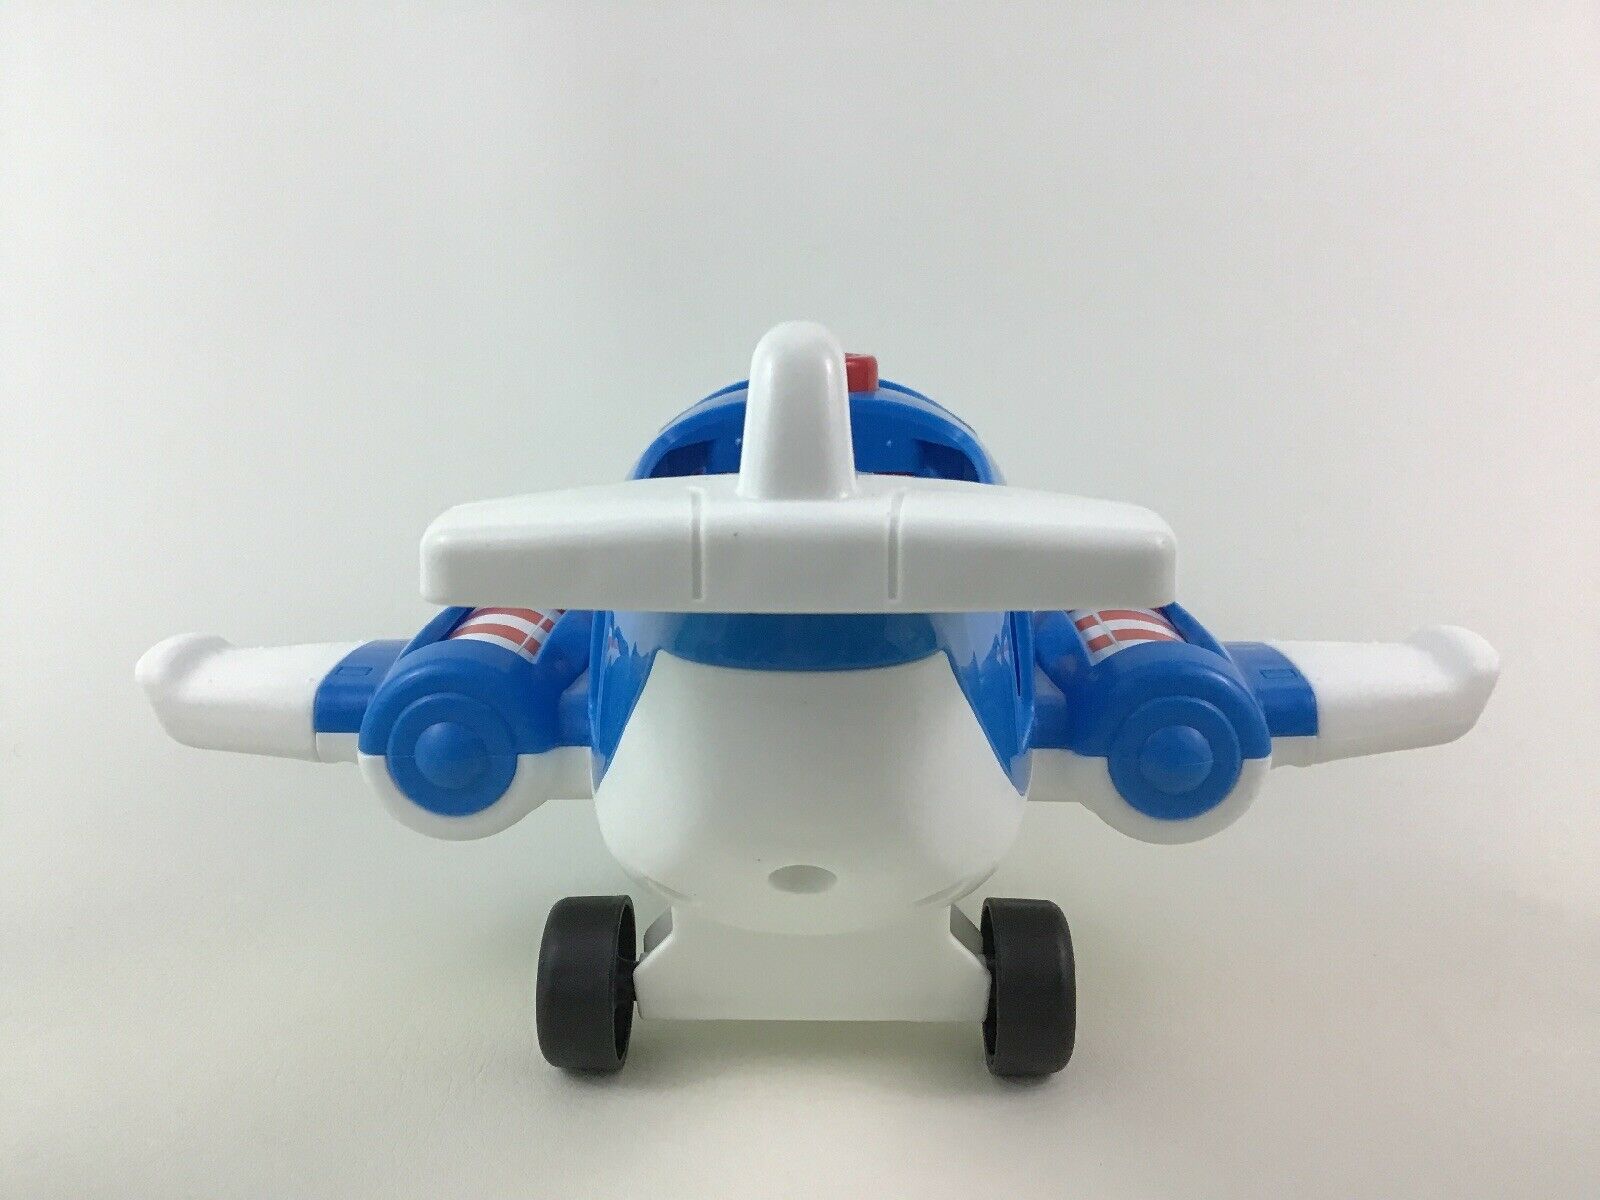 little people airplane